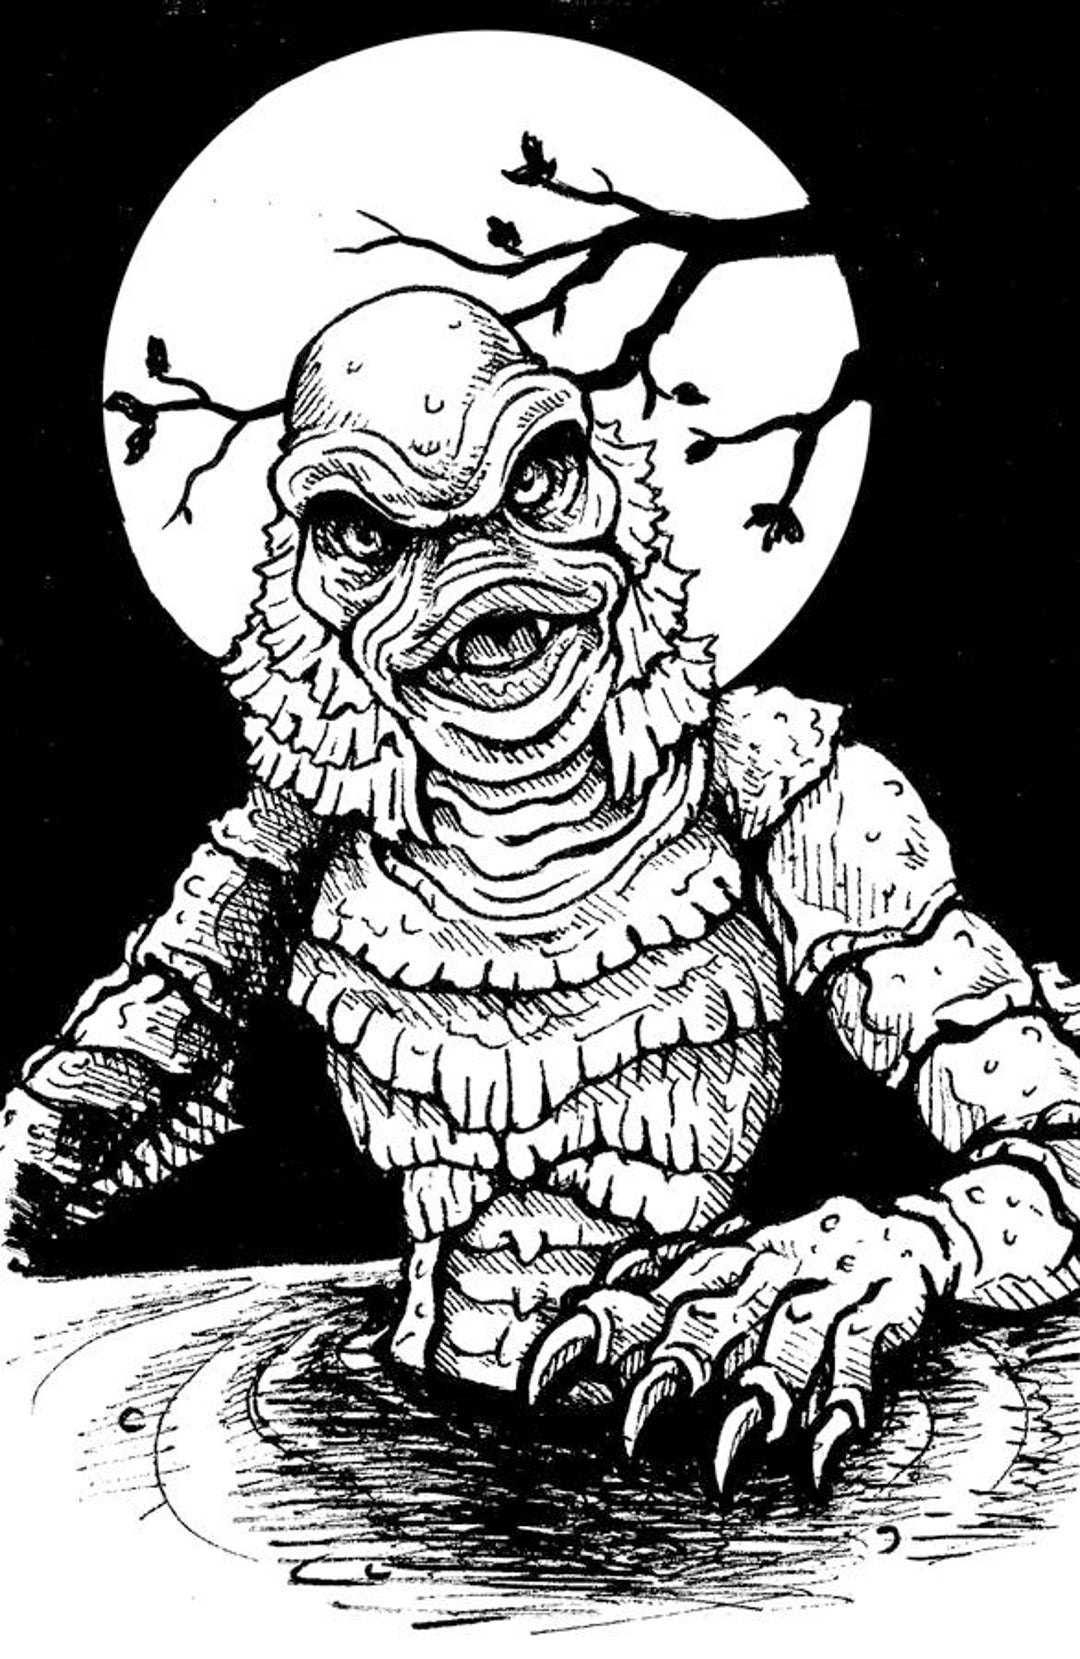 Creature from the black lagoon drawing